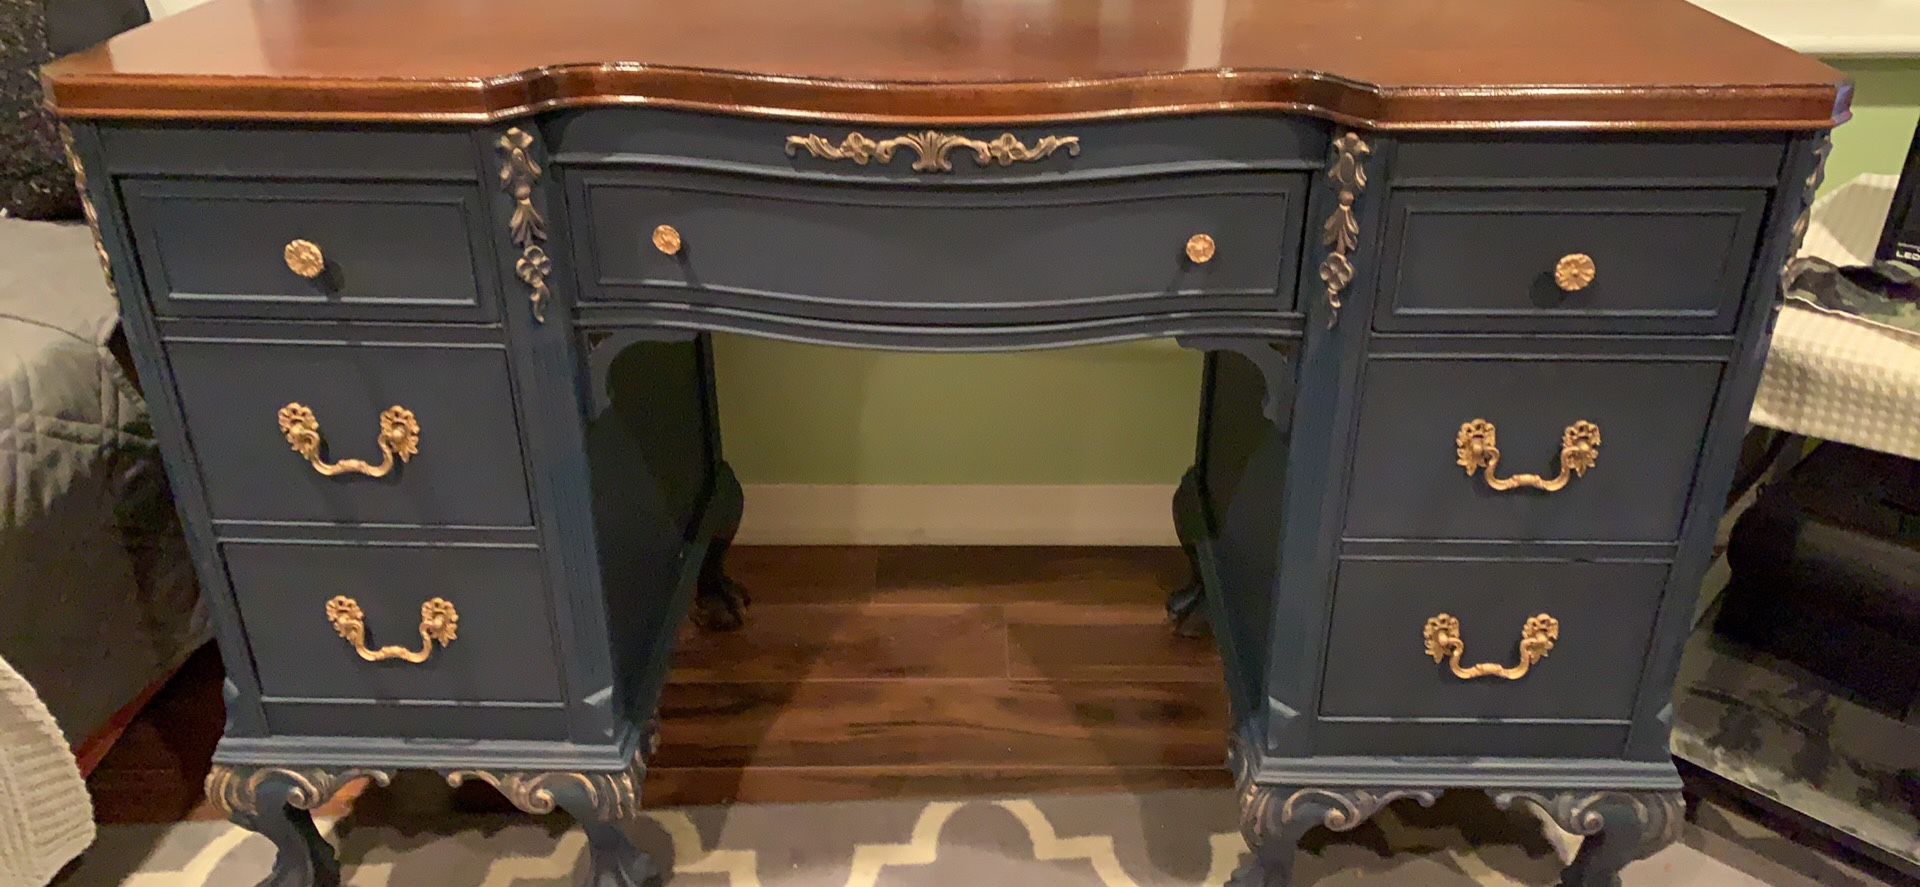 Refinished antique claw foot desk and chair navy blue